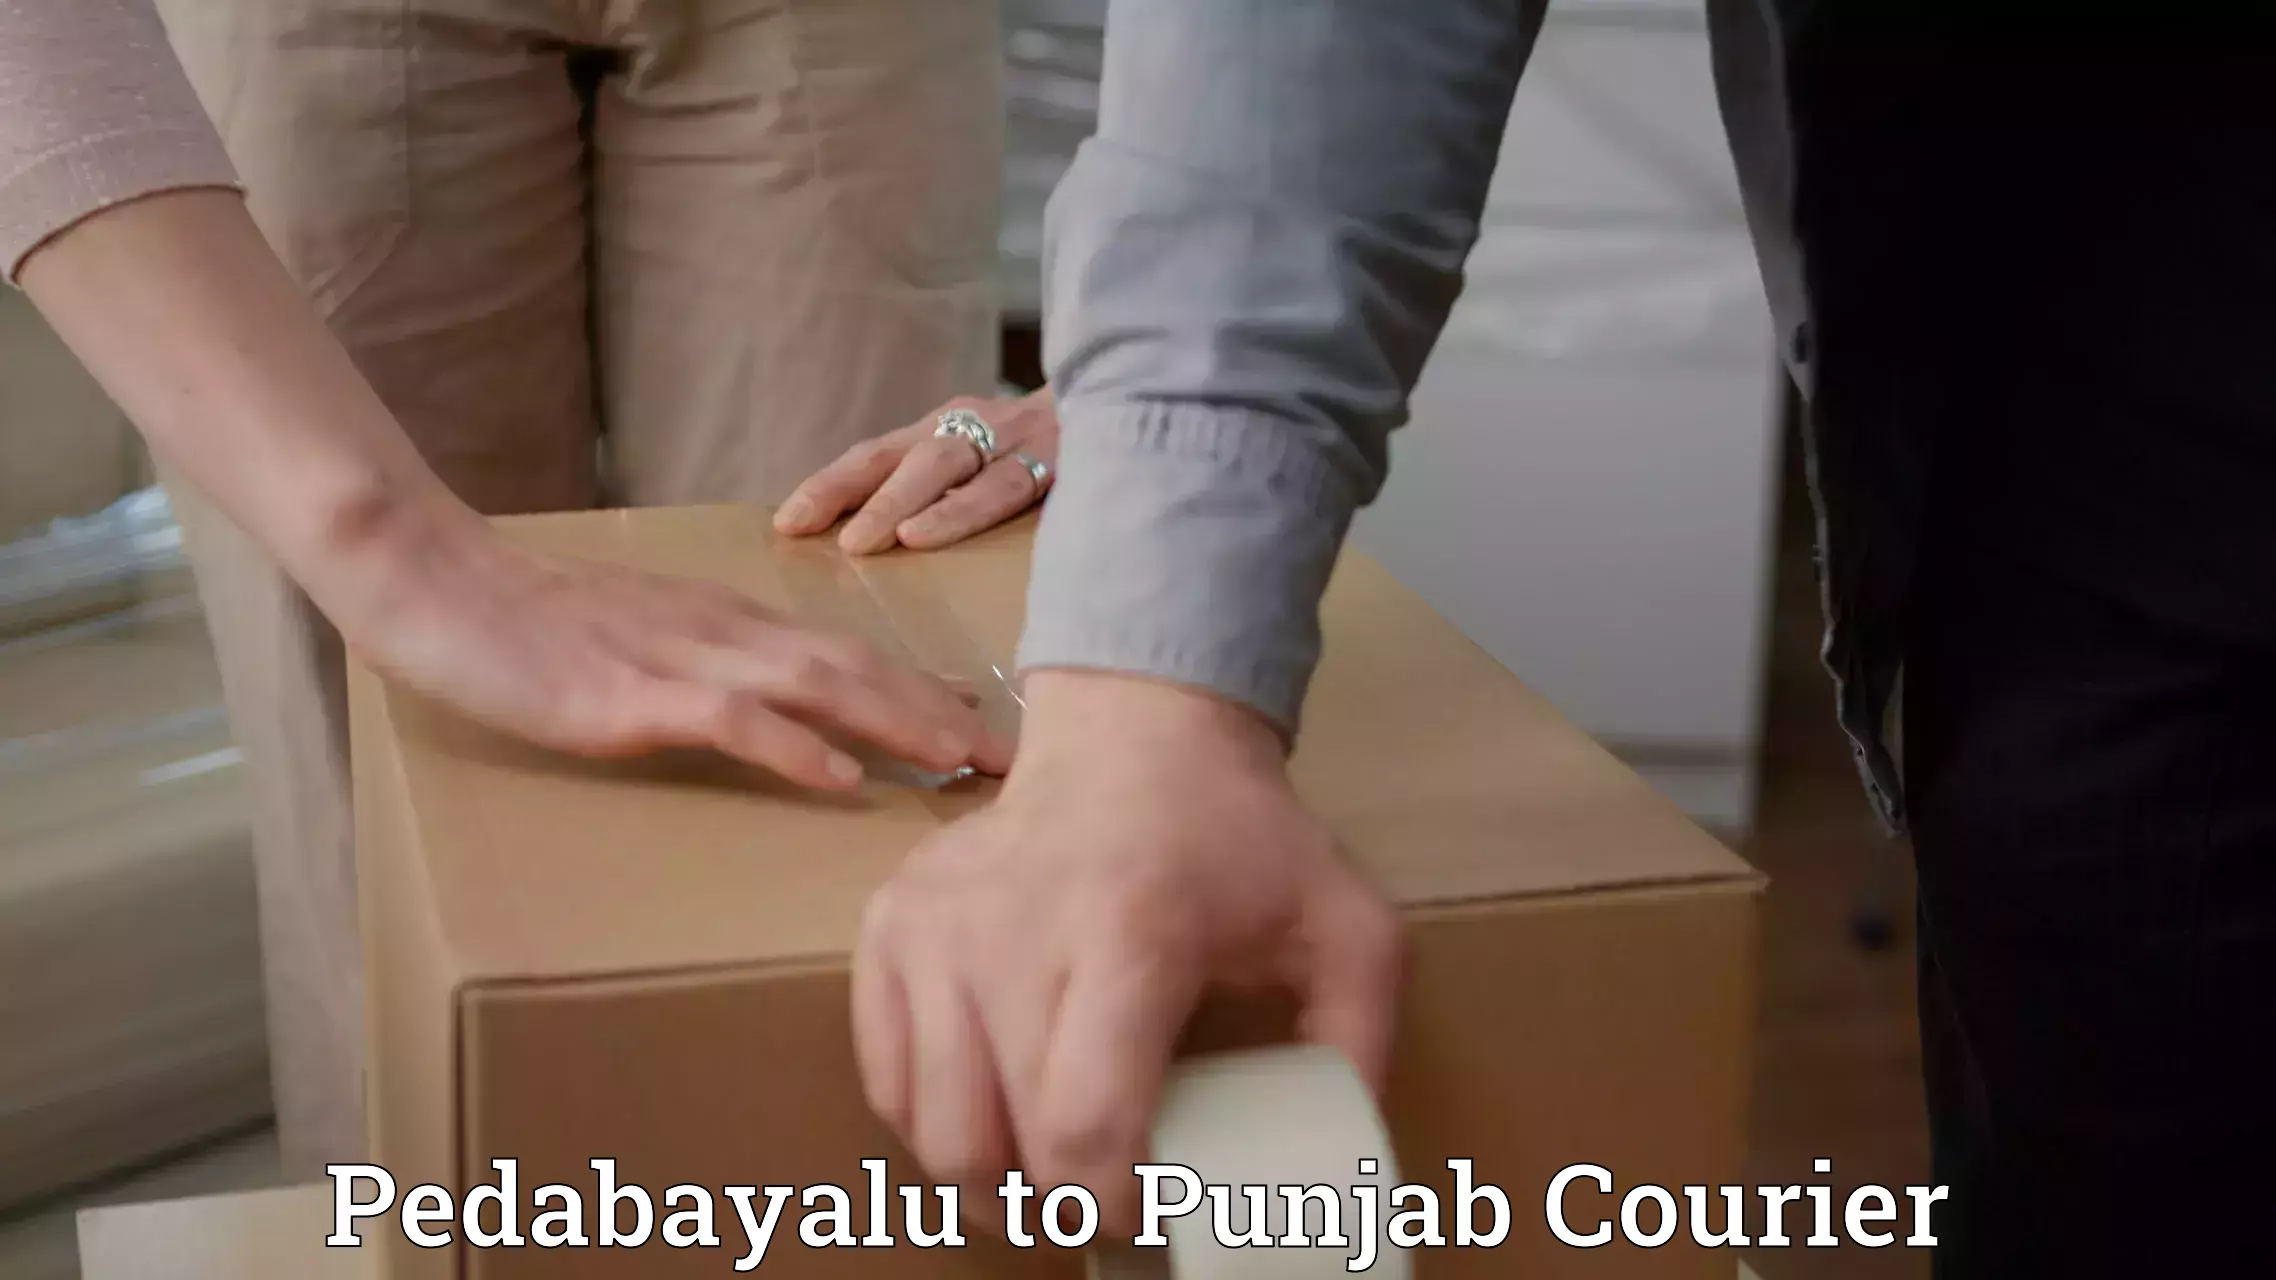 Easy access courier services Pedabayalu to Jalalabad